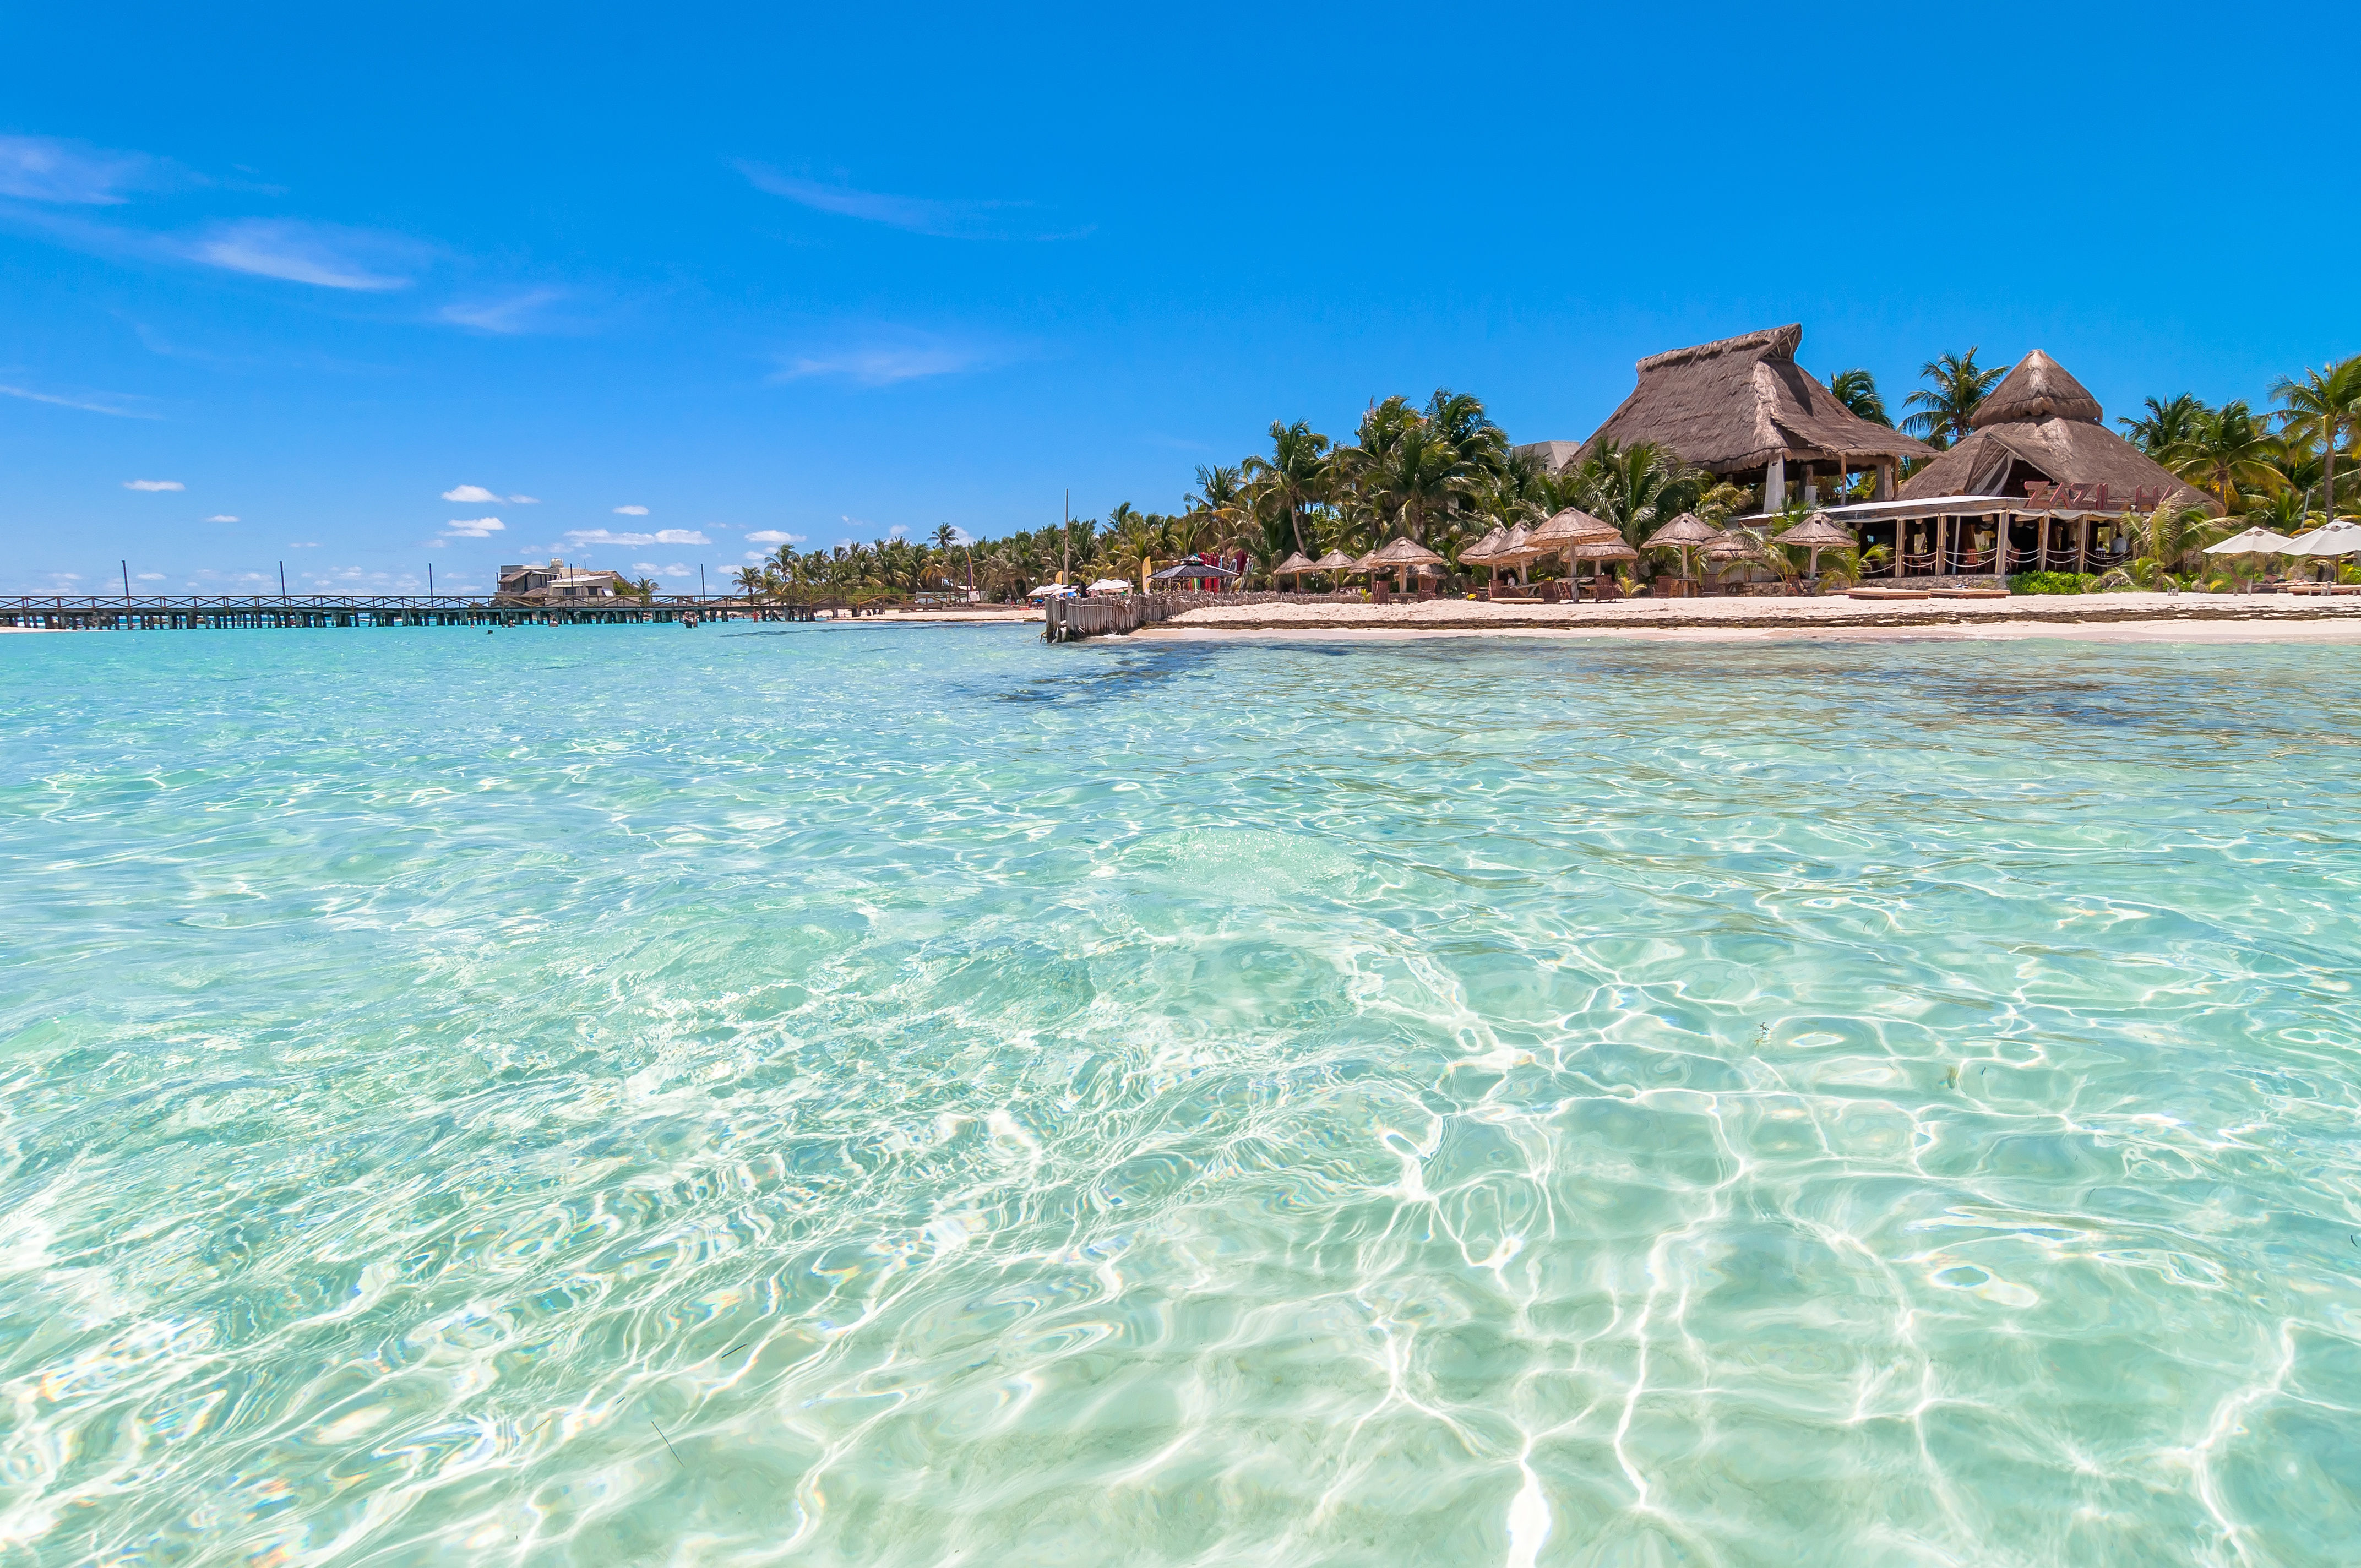 Tropical beach and resort, surrounded by shallow crystal clear waters and wooden jetty in Quintana Roo, Mexico. 